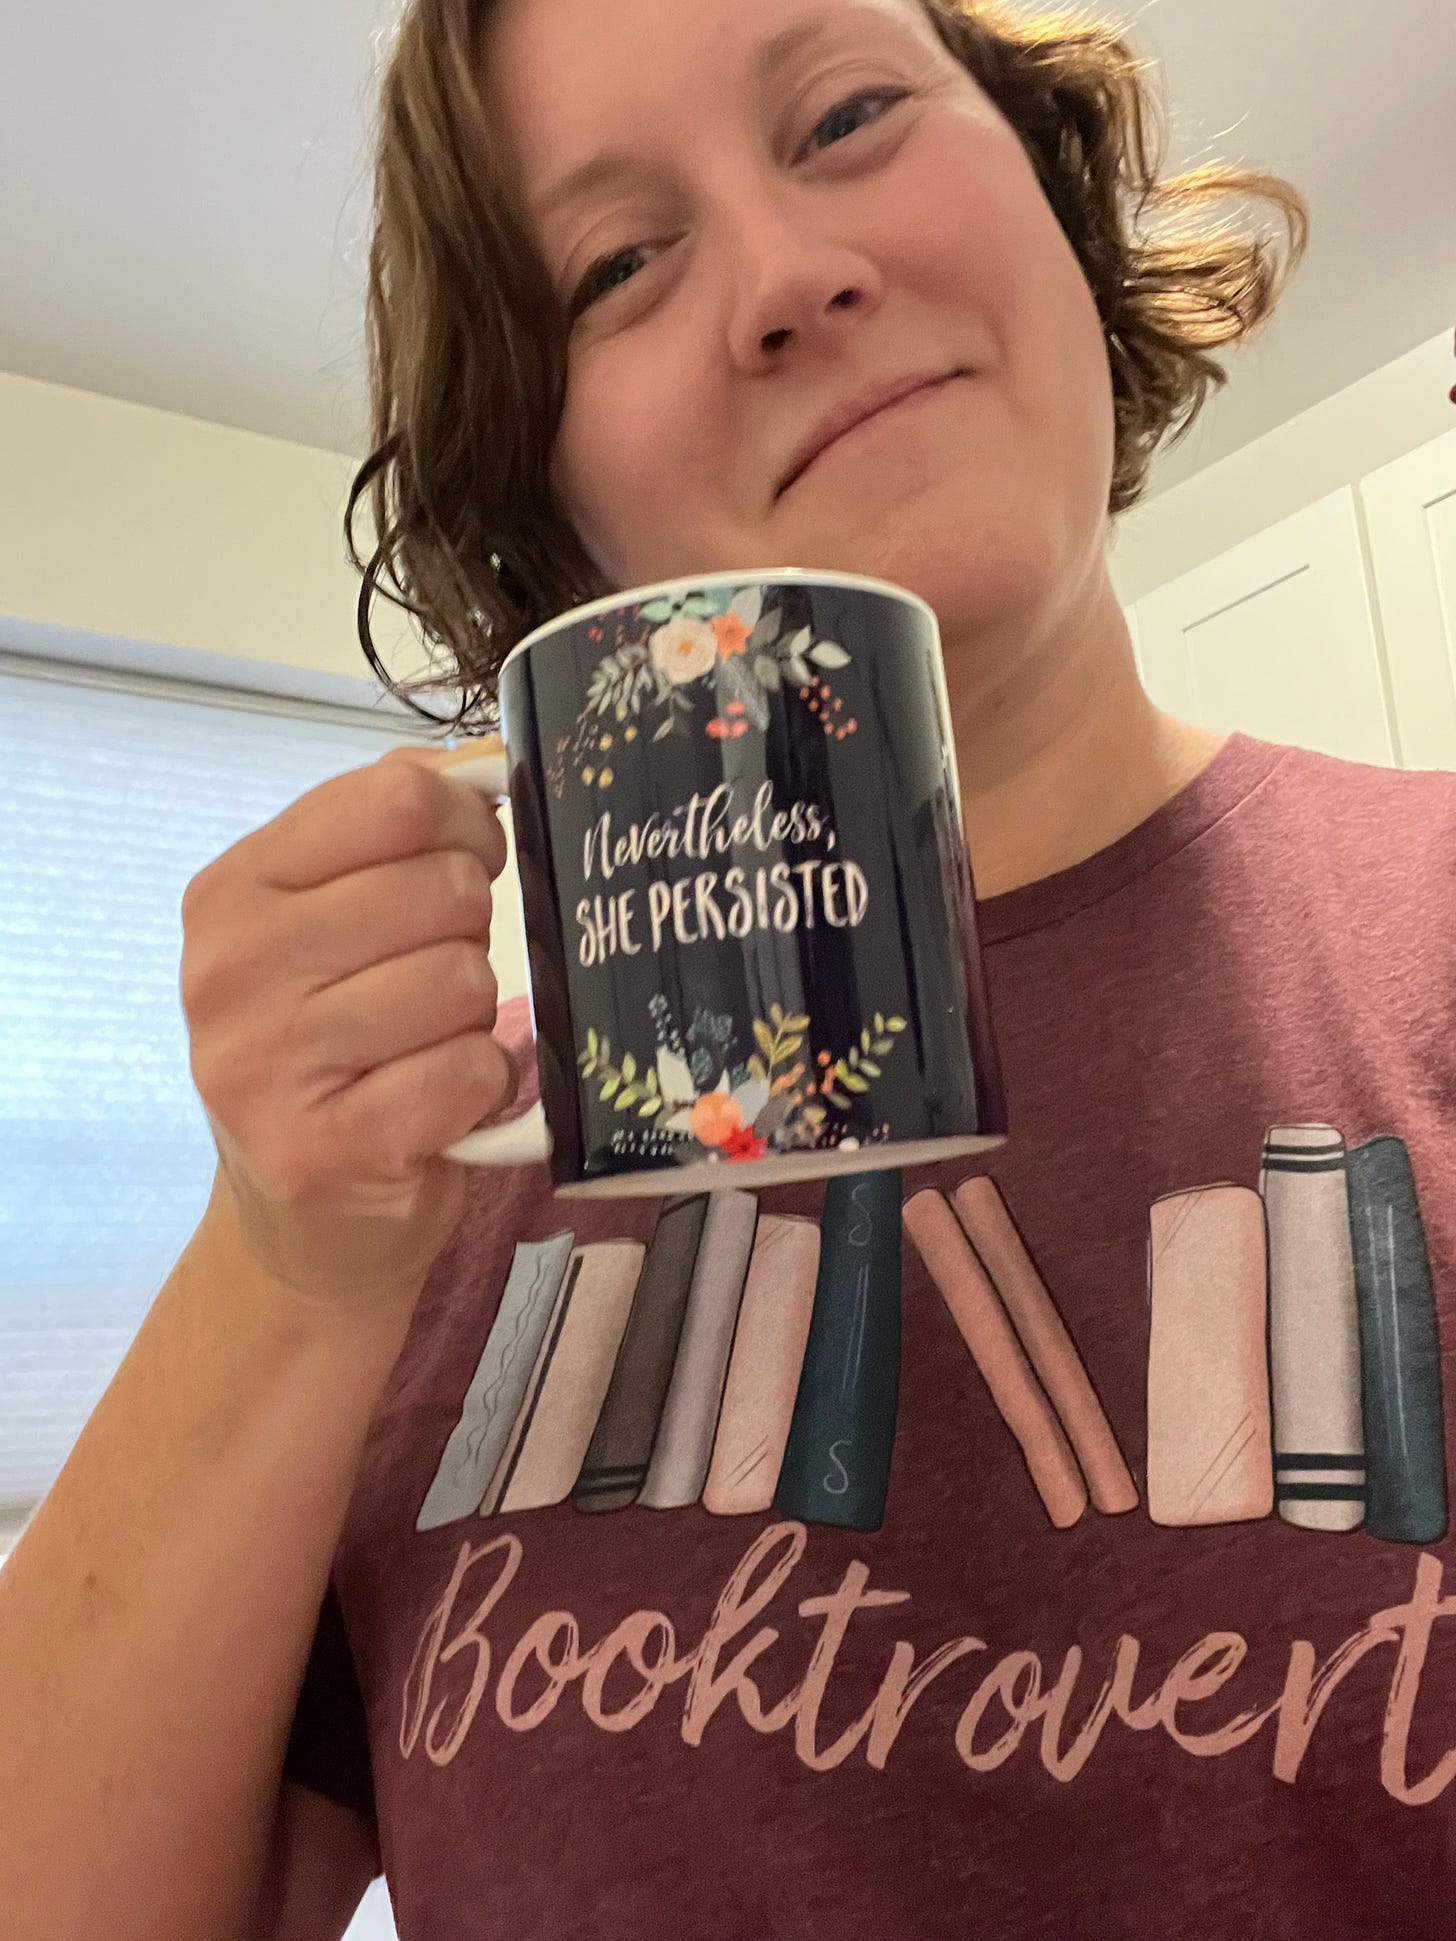 me drinking a cup of tea from a mug that says "Nevertheless, she persisted"